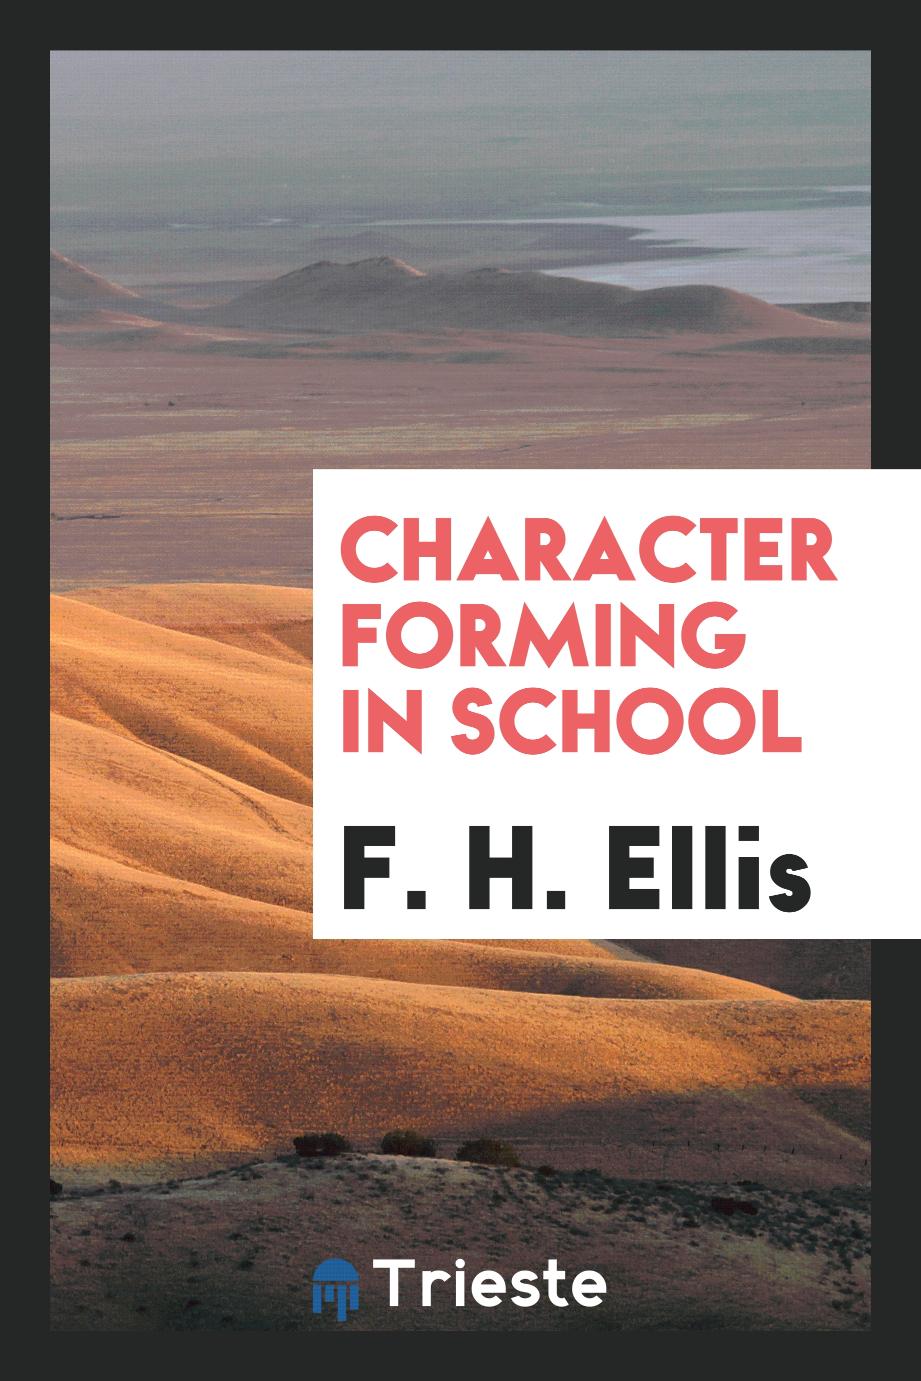 Character forming in school